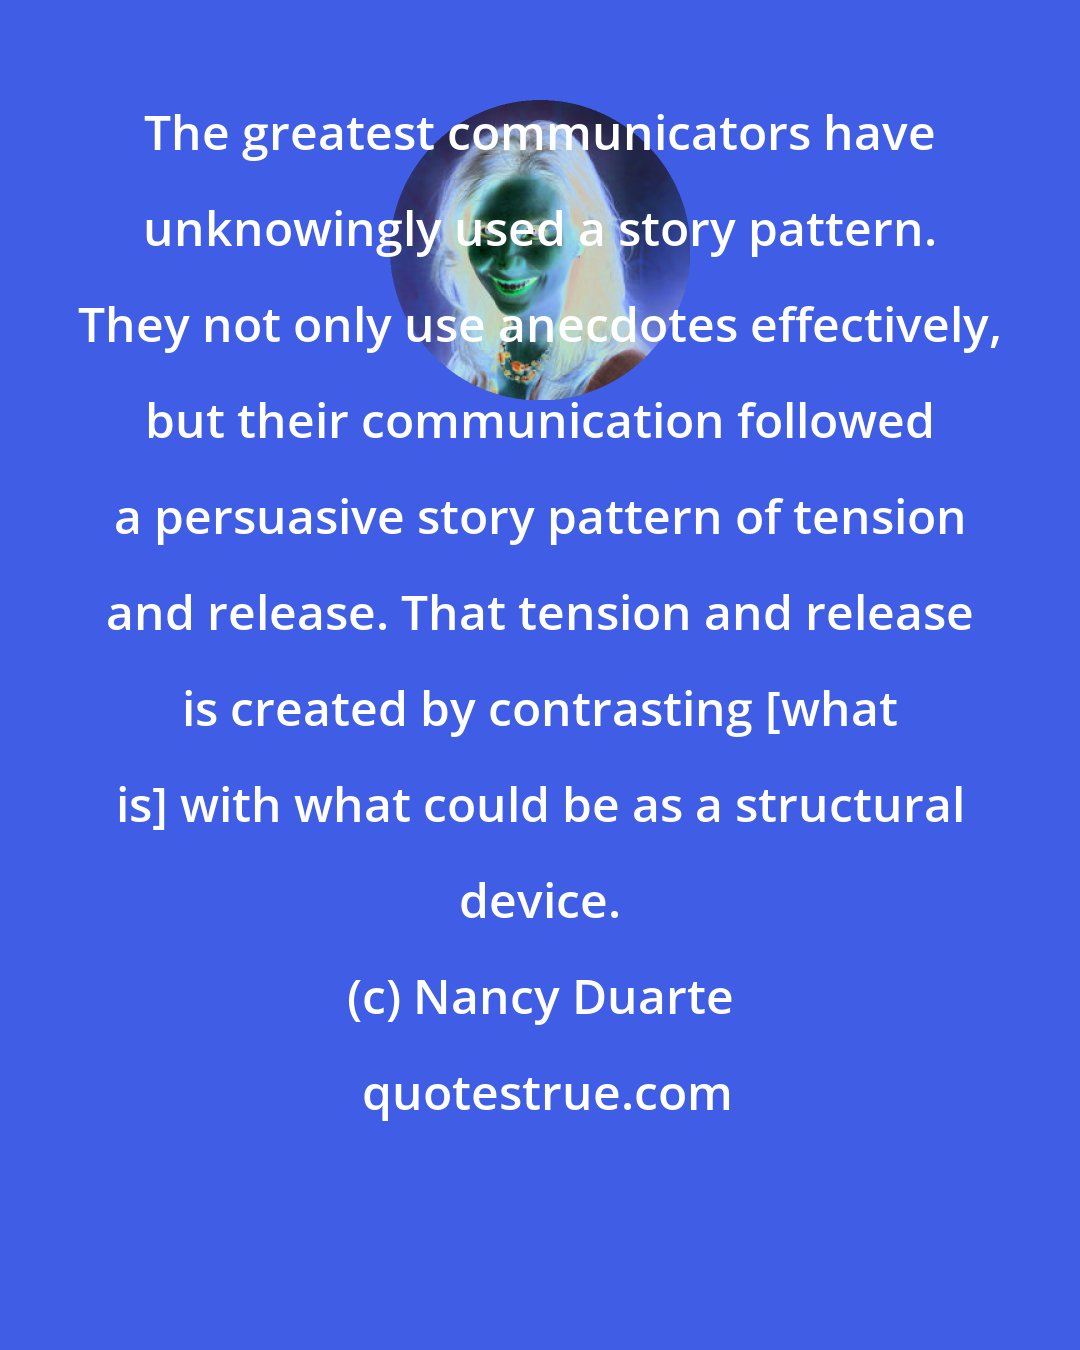 Nancy Duarte: The greatest communicators have unknowingly used a story pattern. They not only use anecdotes effectively, but their communication followed a persuasive story pattern of tension and release. That tension and release is created by contrasting [what is] with what could be as a structural device.